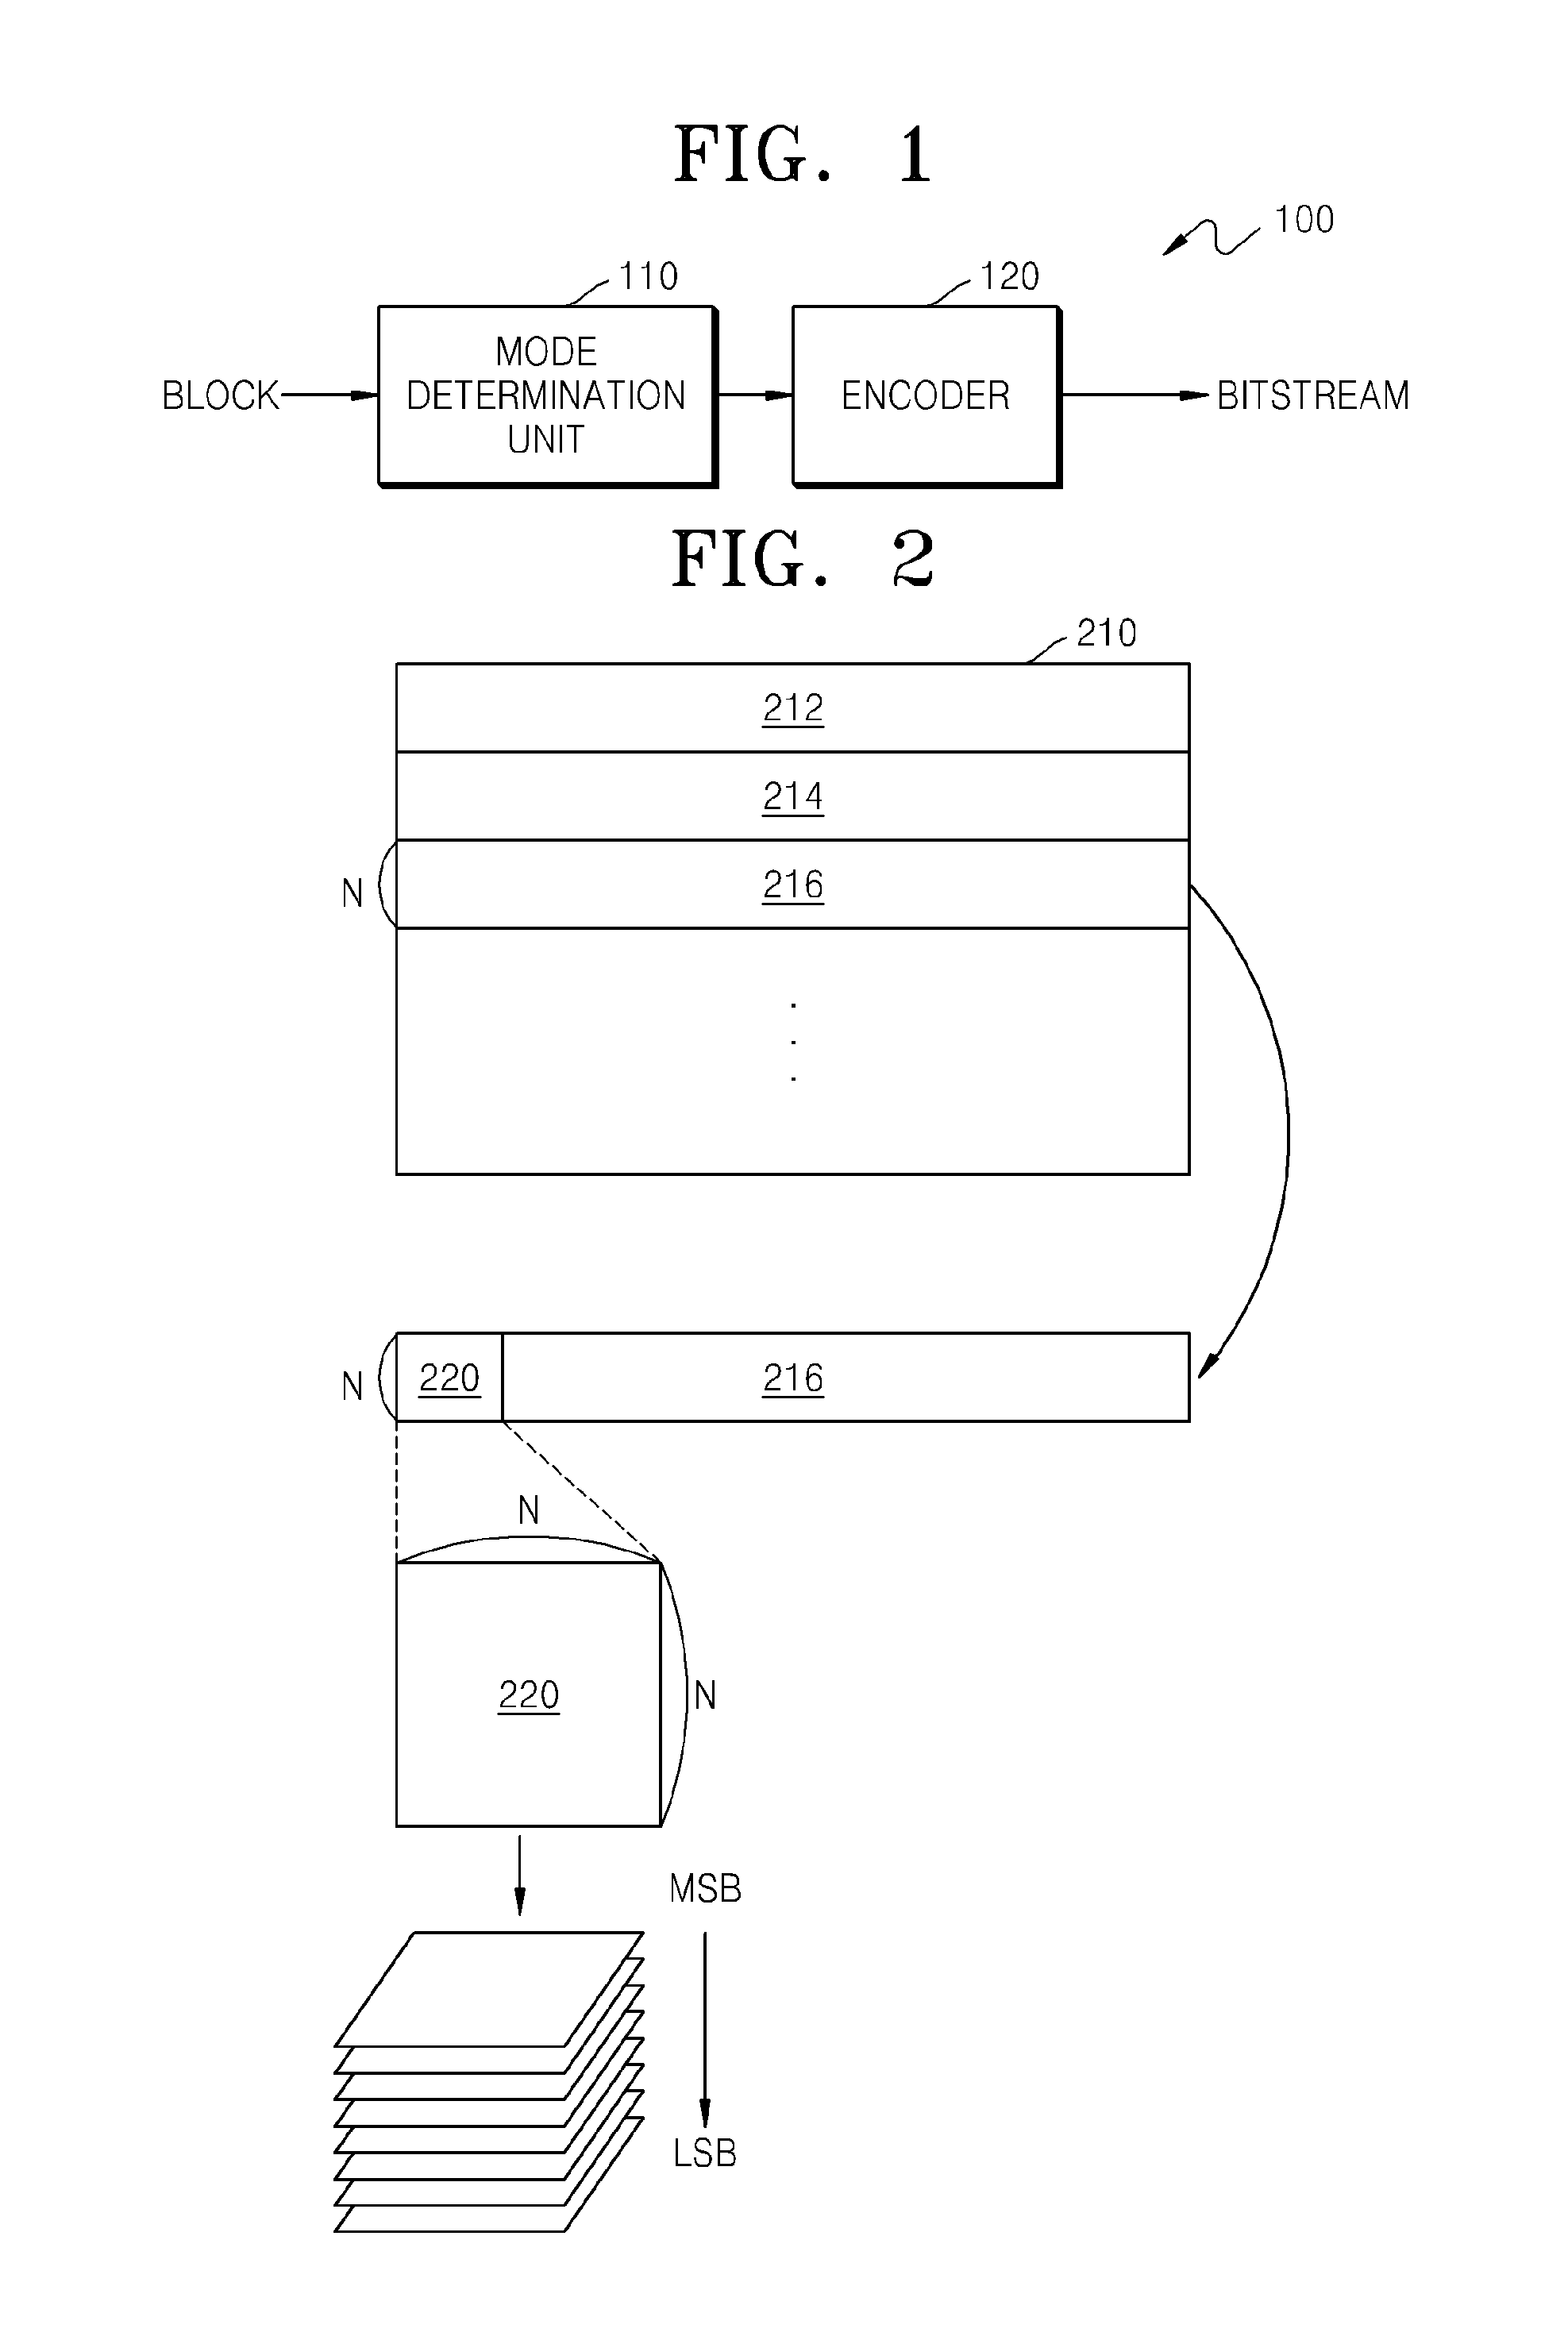 Method and apparatus for encoding and decoding image based on skip mode